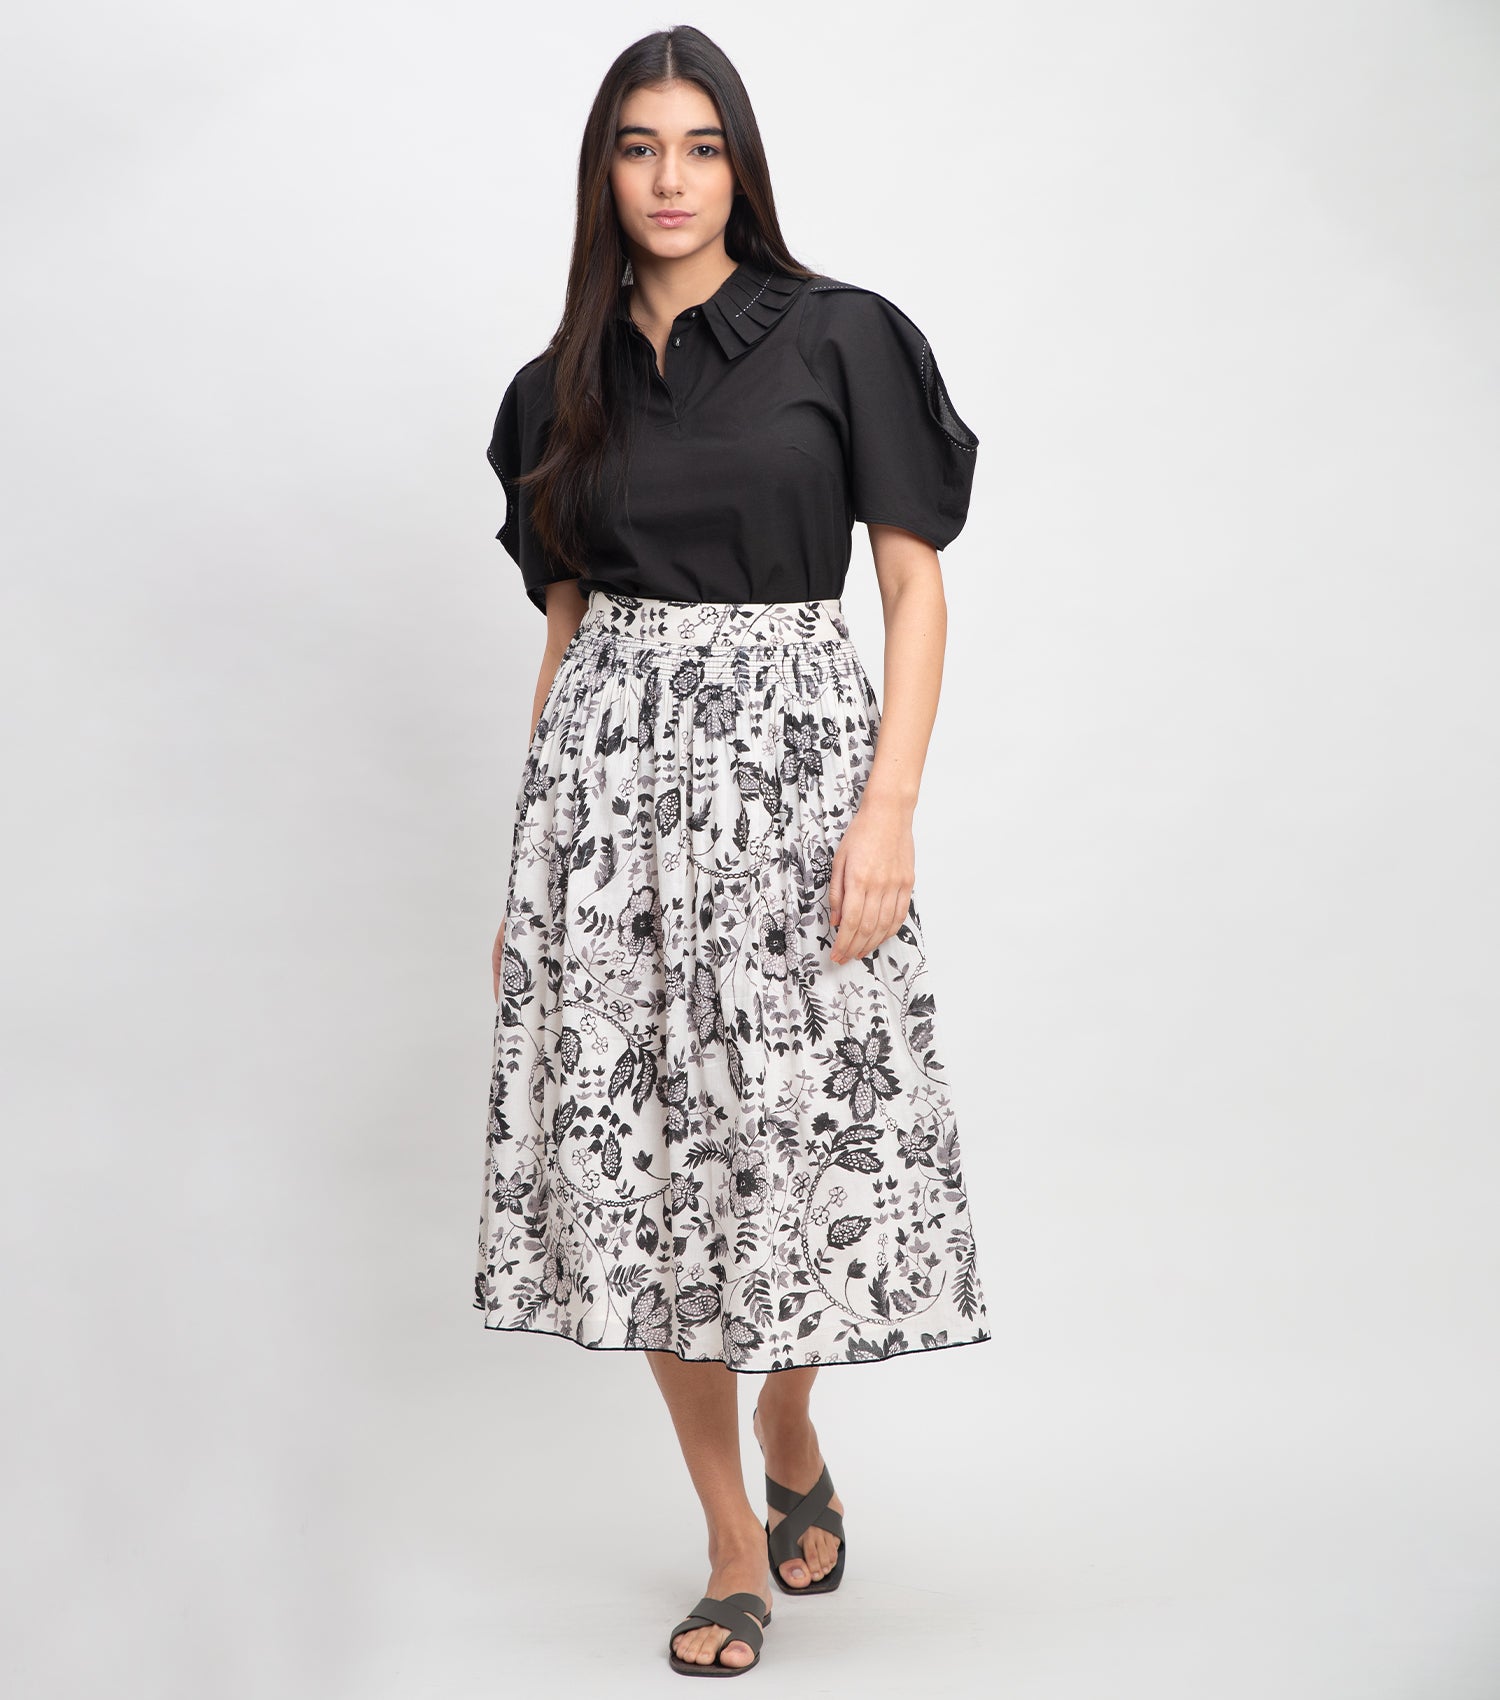 Off White Cotton Printed Skirt With Pleats On The Waistline